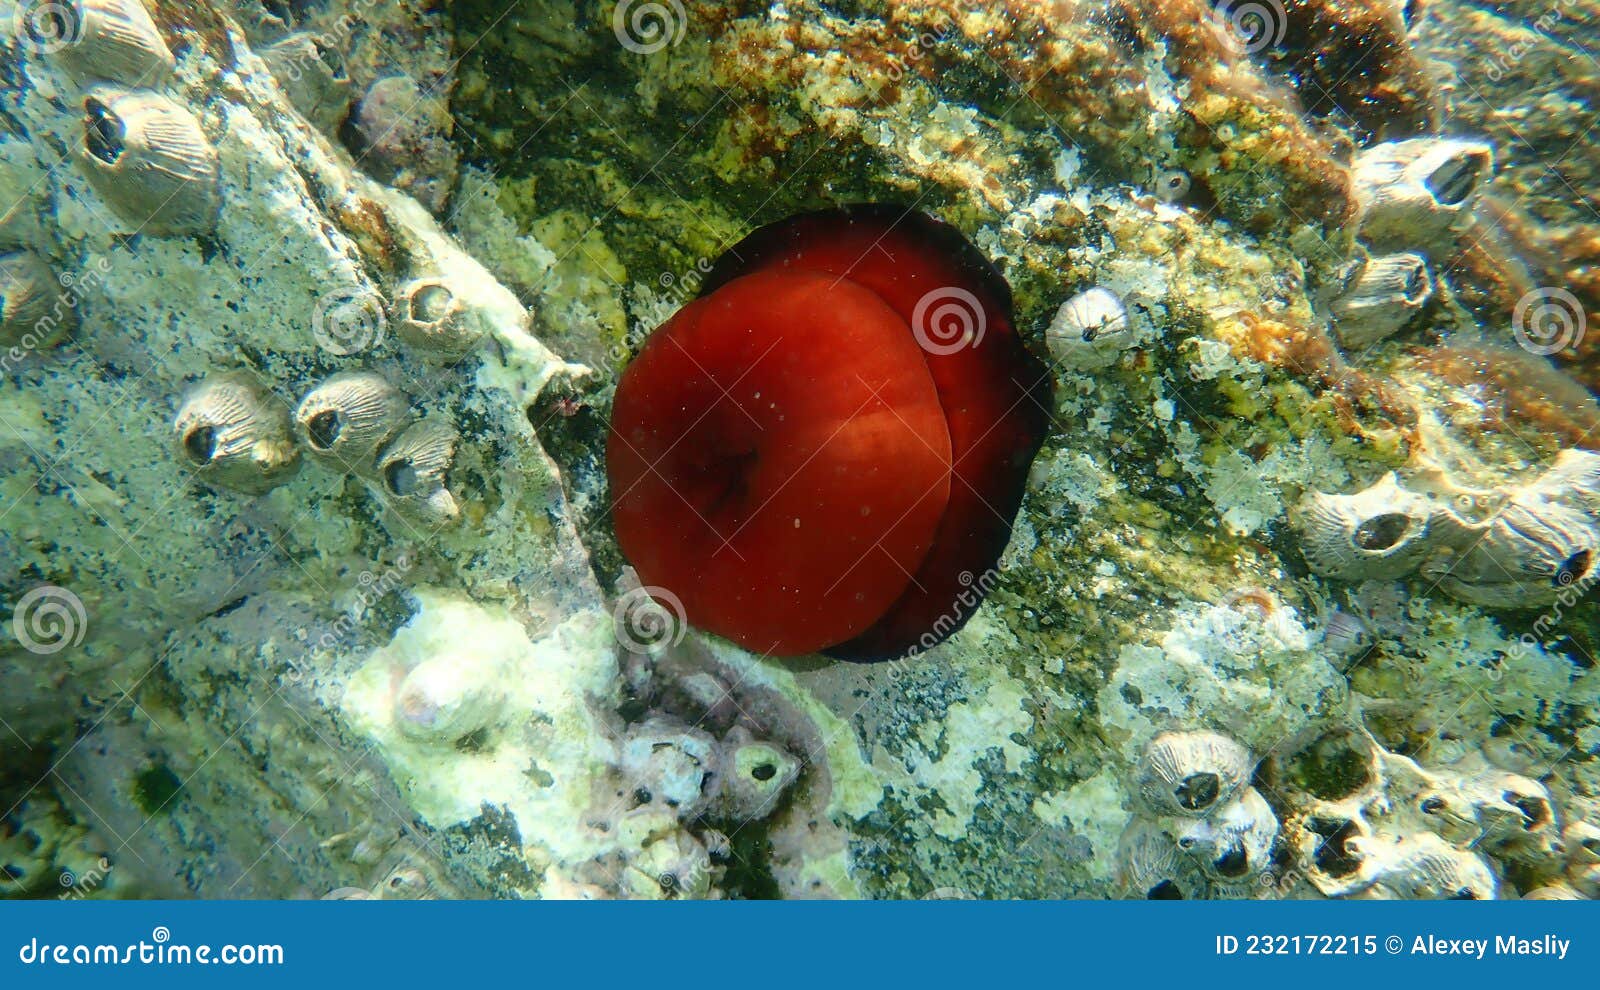 Closed Plum Anemone, Beadlet Anemone Red Anemone, Actinia Equina, Undersea Stock Image - Image of beadlet, diving: 232172215